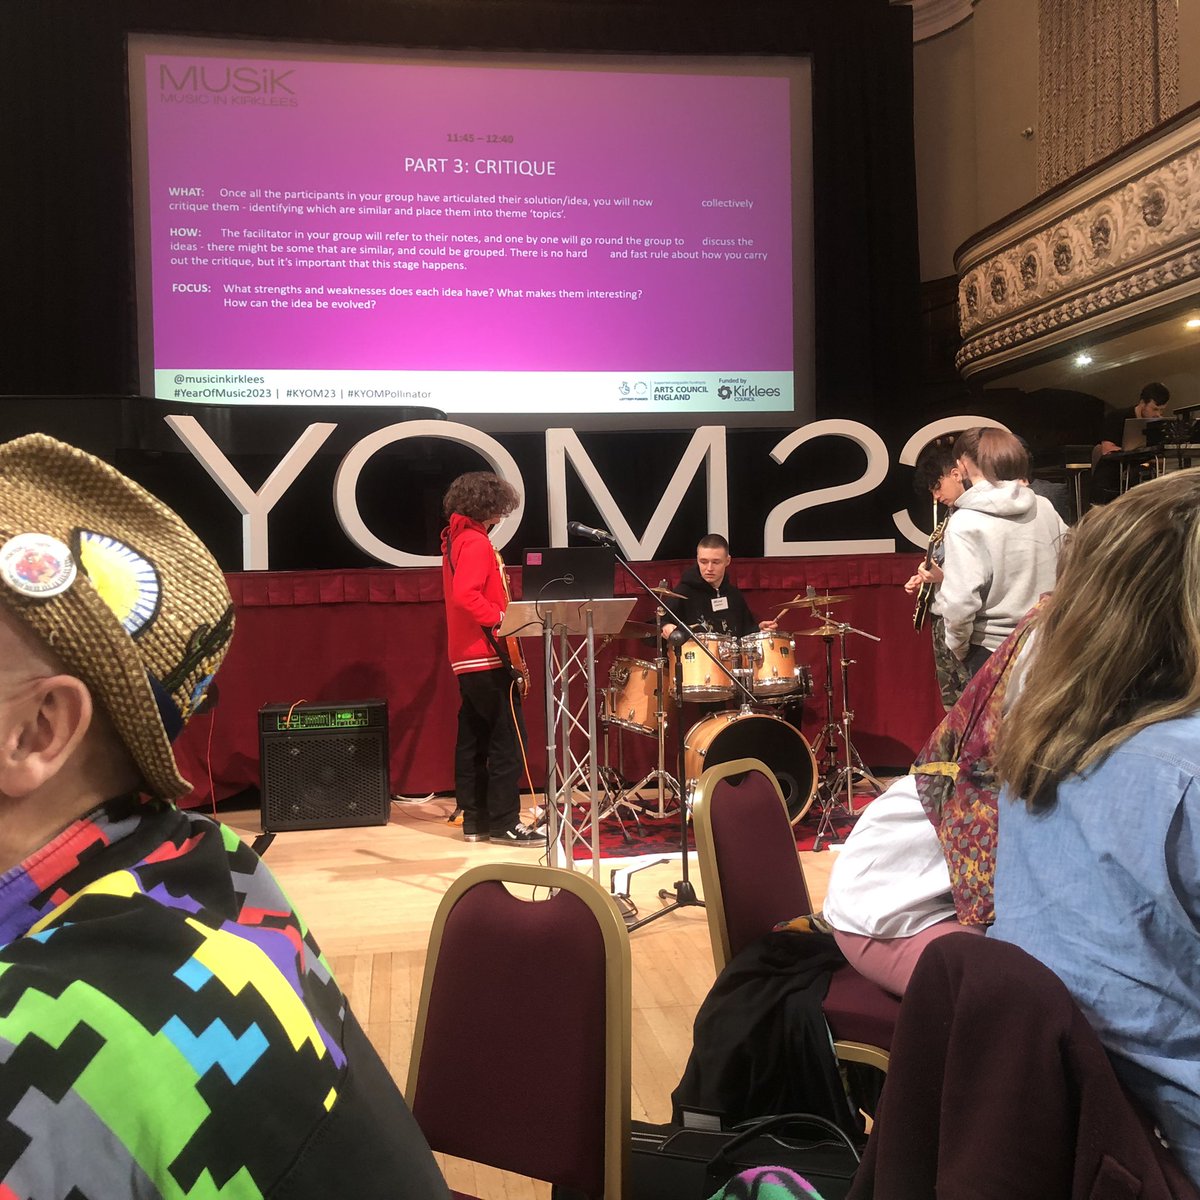 At the magnificent Town Hall building Dewsbury for Kirklees #yearofmusic2023 
networking sessions ….
 
#KYOM23 #KYOMpollinator #kirkleesmusic #kirklees #huddersfieldmusicscene